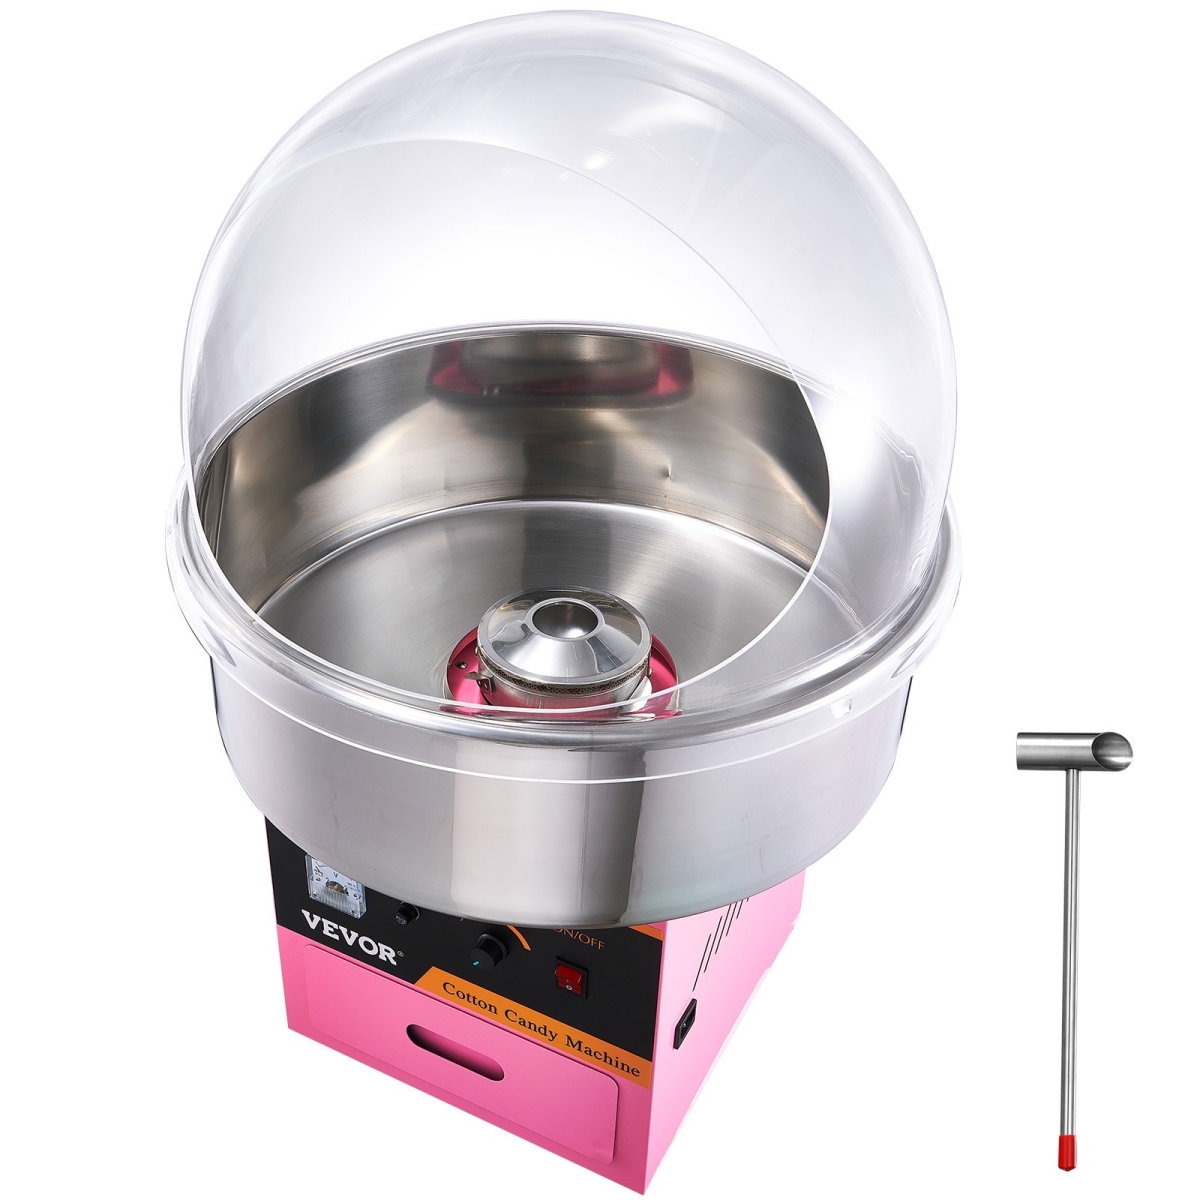 Picture of Vevor ZHSKU00000000000015 Electric Cotton Candy Machine&#44; 1000W Candy Floss Maker - Commercial Cotton Candy Machine with Stainless Steel Bowl